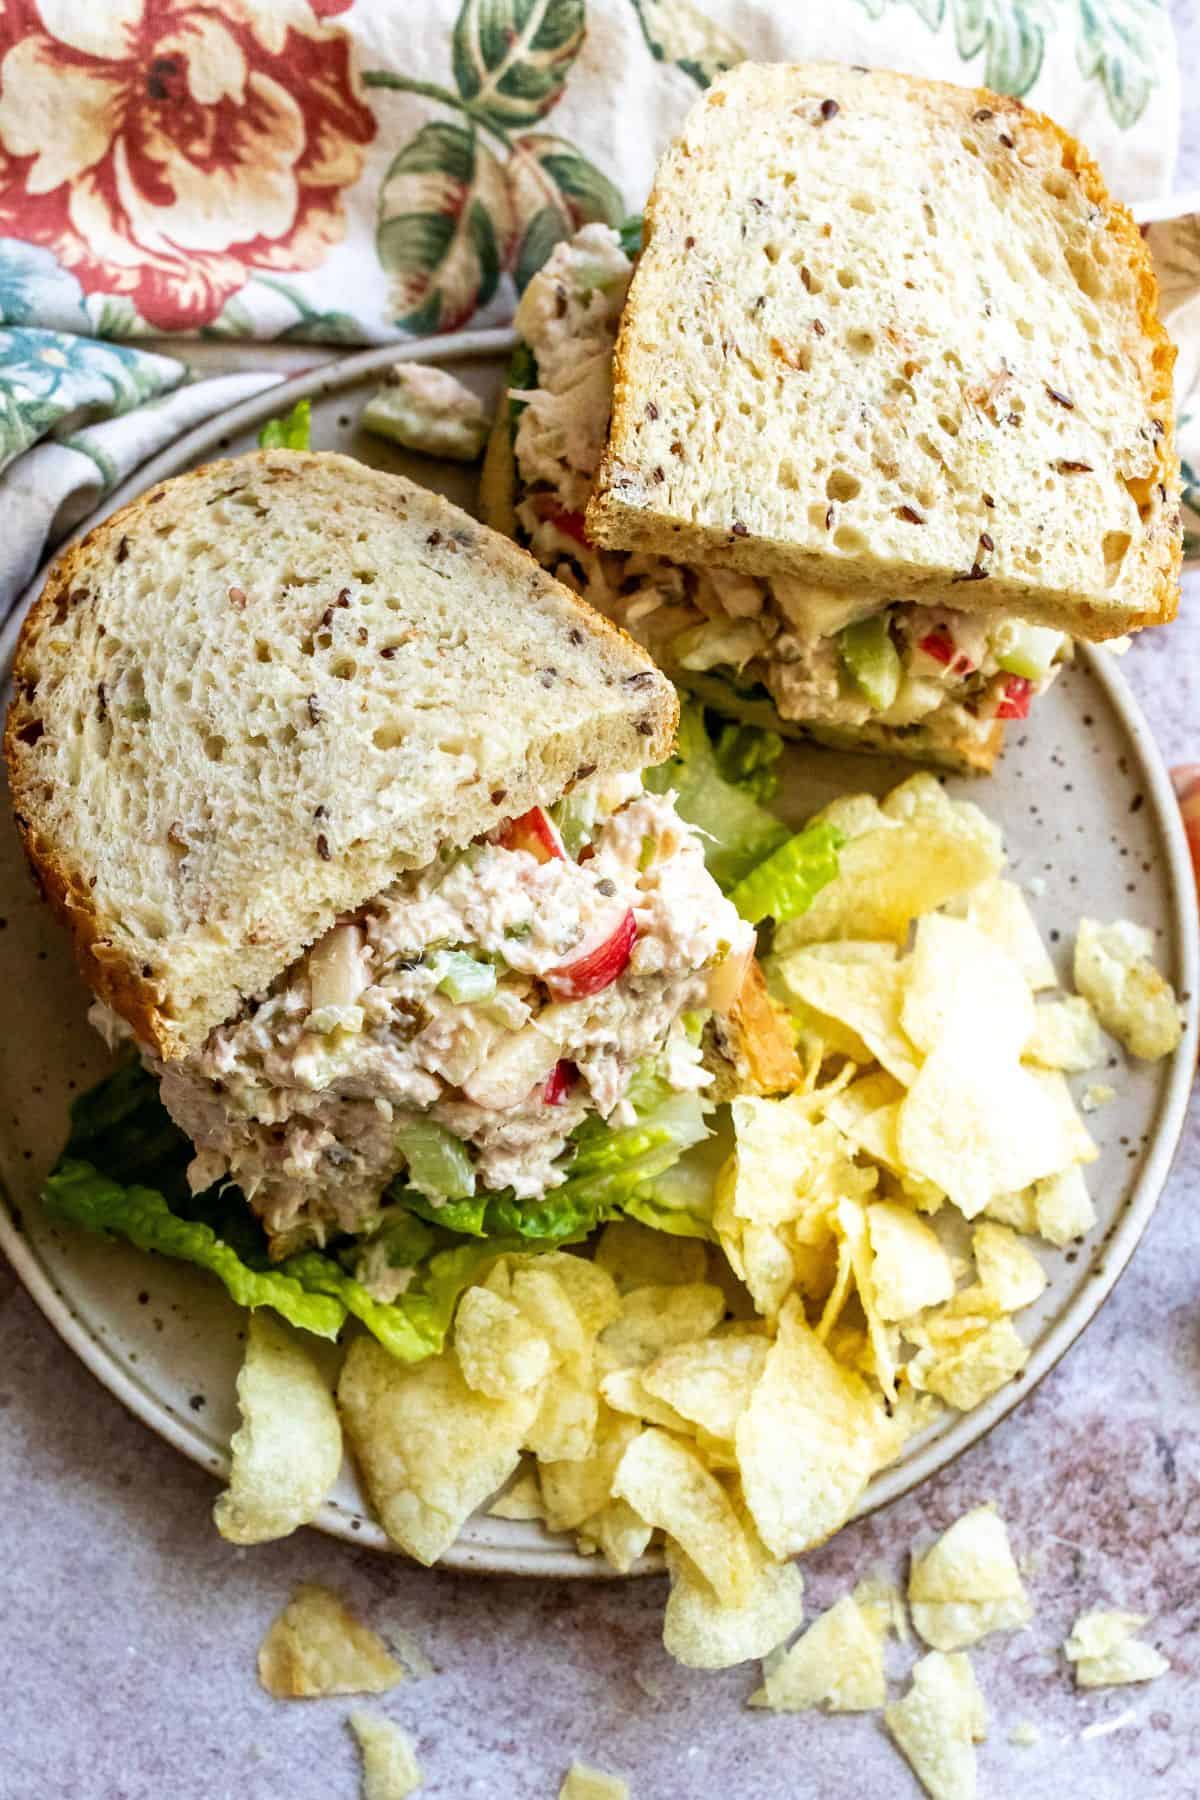 Plate with bread and apples on it. Tuna salad in the bread. 